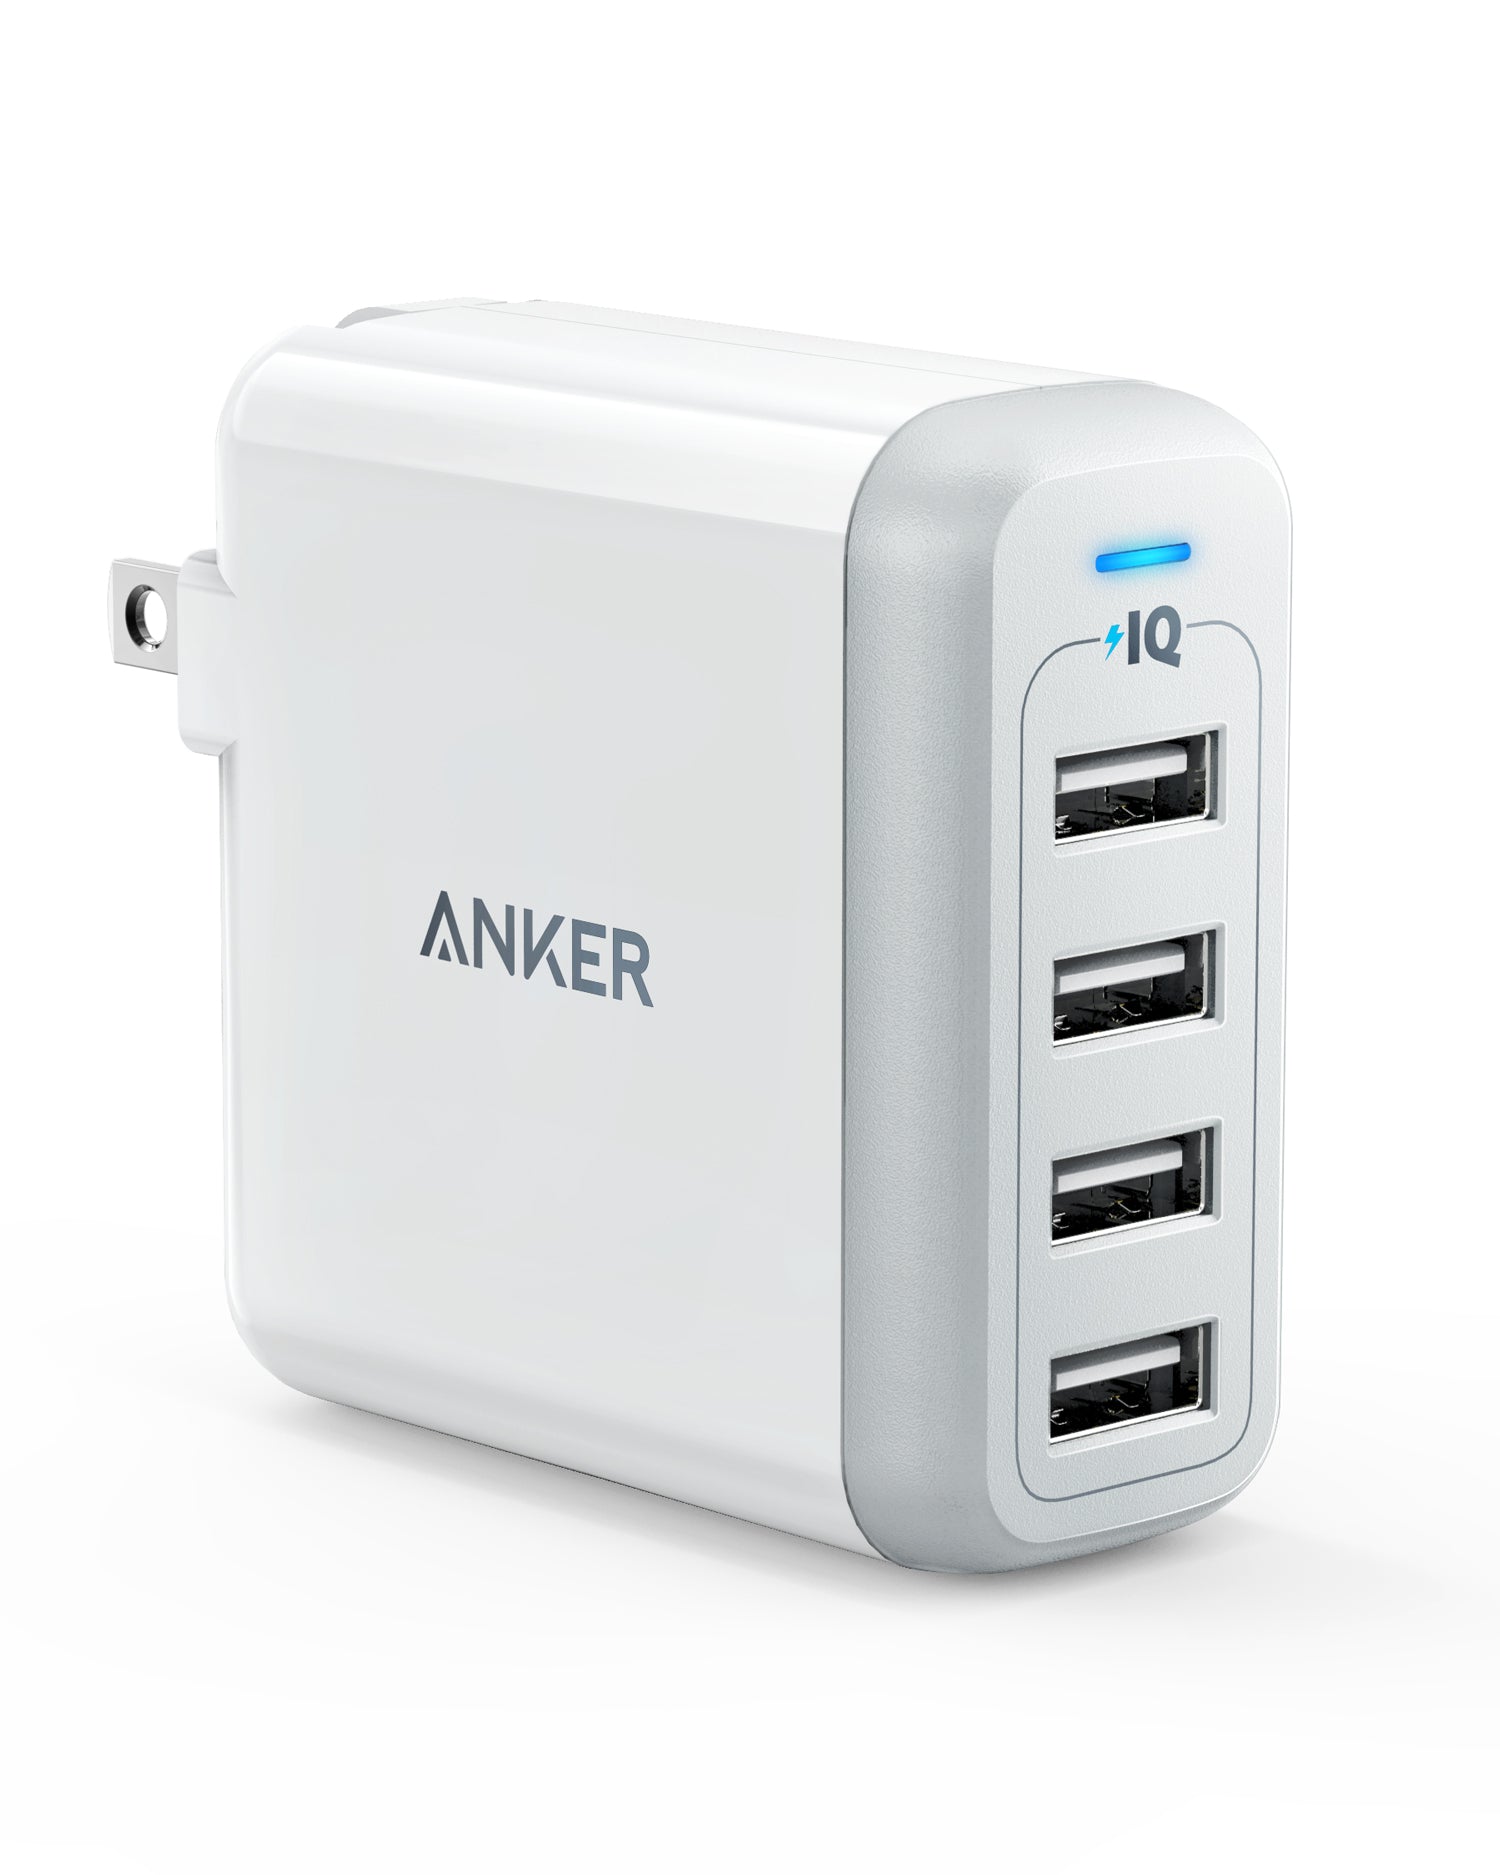 Quickly Juice Up an iPhone 15 with Anker 713 Nano Charger at $27